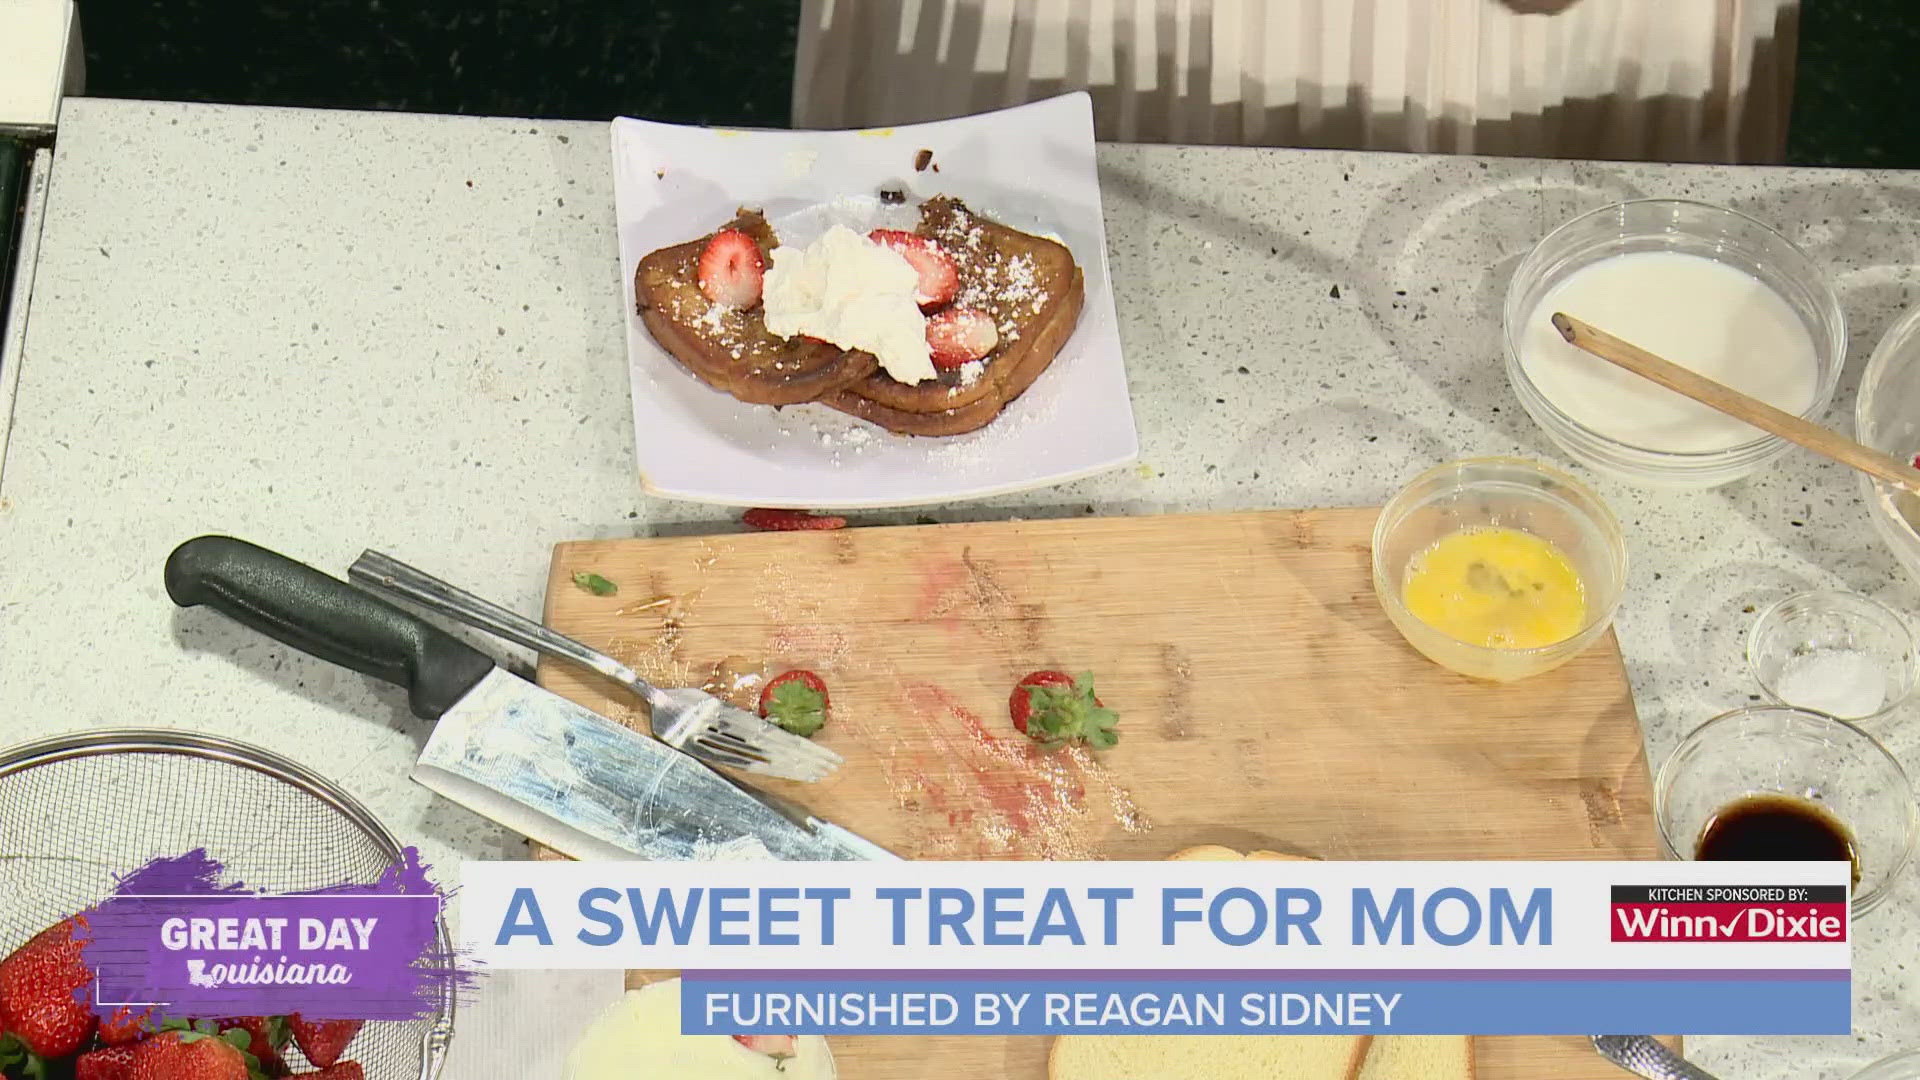 Chef Reagan Sidney shows us how to make a stuffed french toast your mom will love.